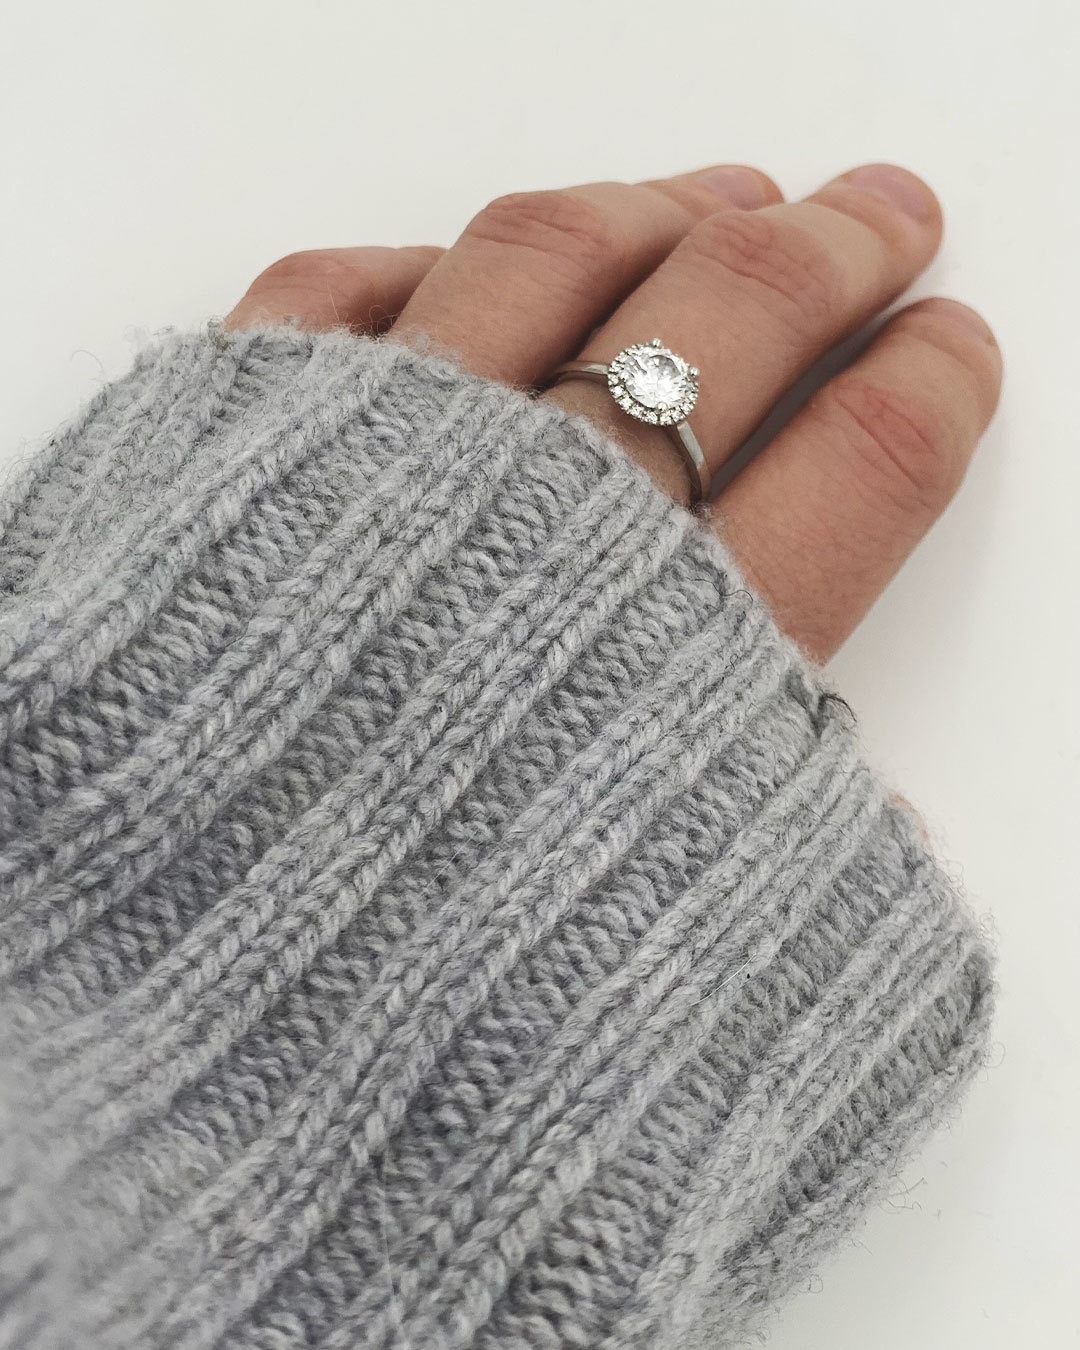 Ingenieurs ik ben verdwaald chrysant Can I wear my engagement ring on the middle finger? | My Diamond Ring